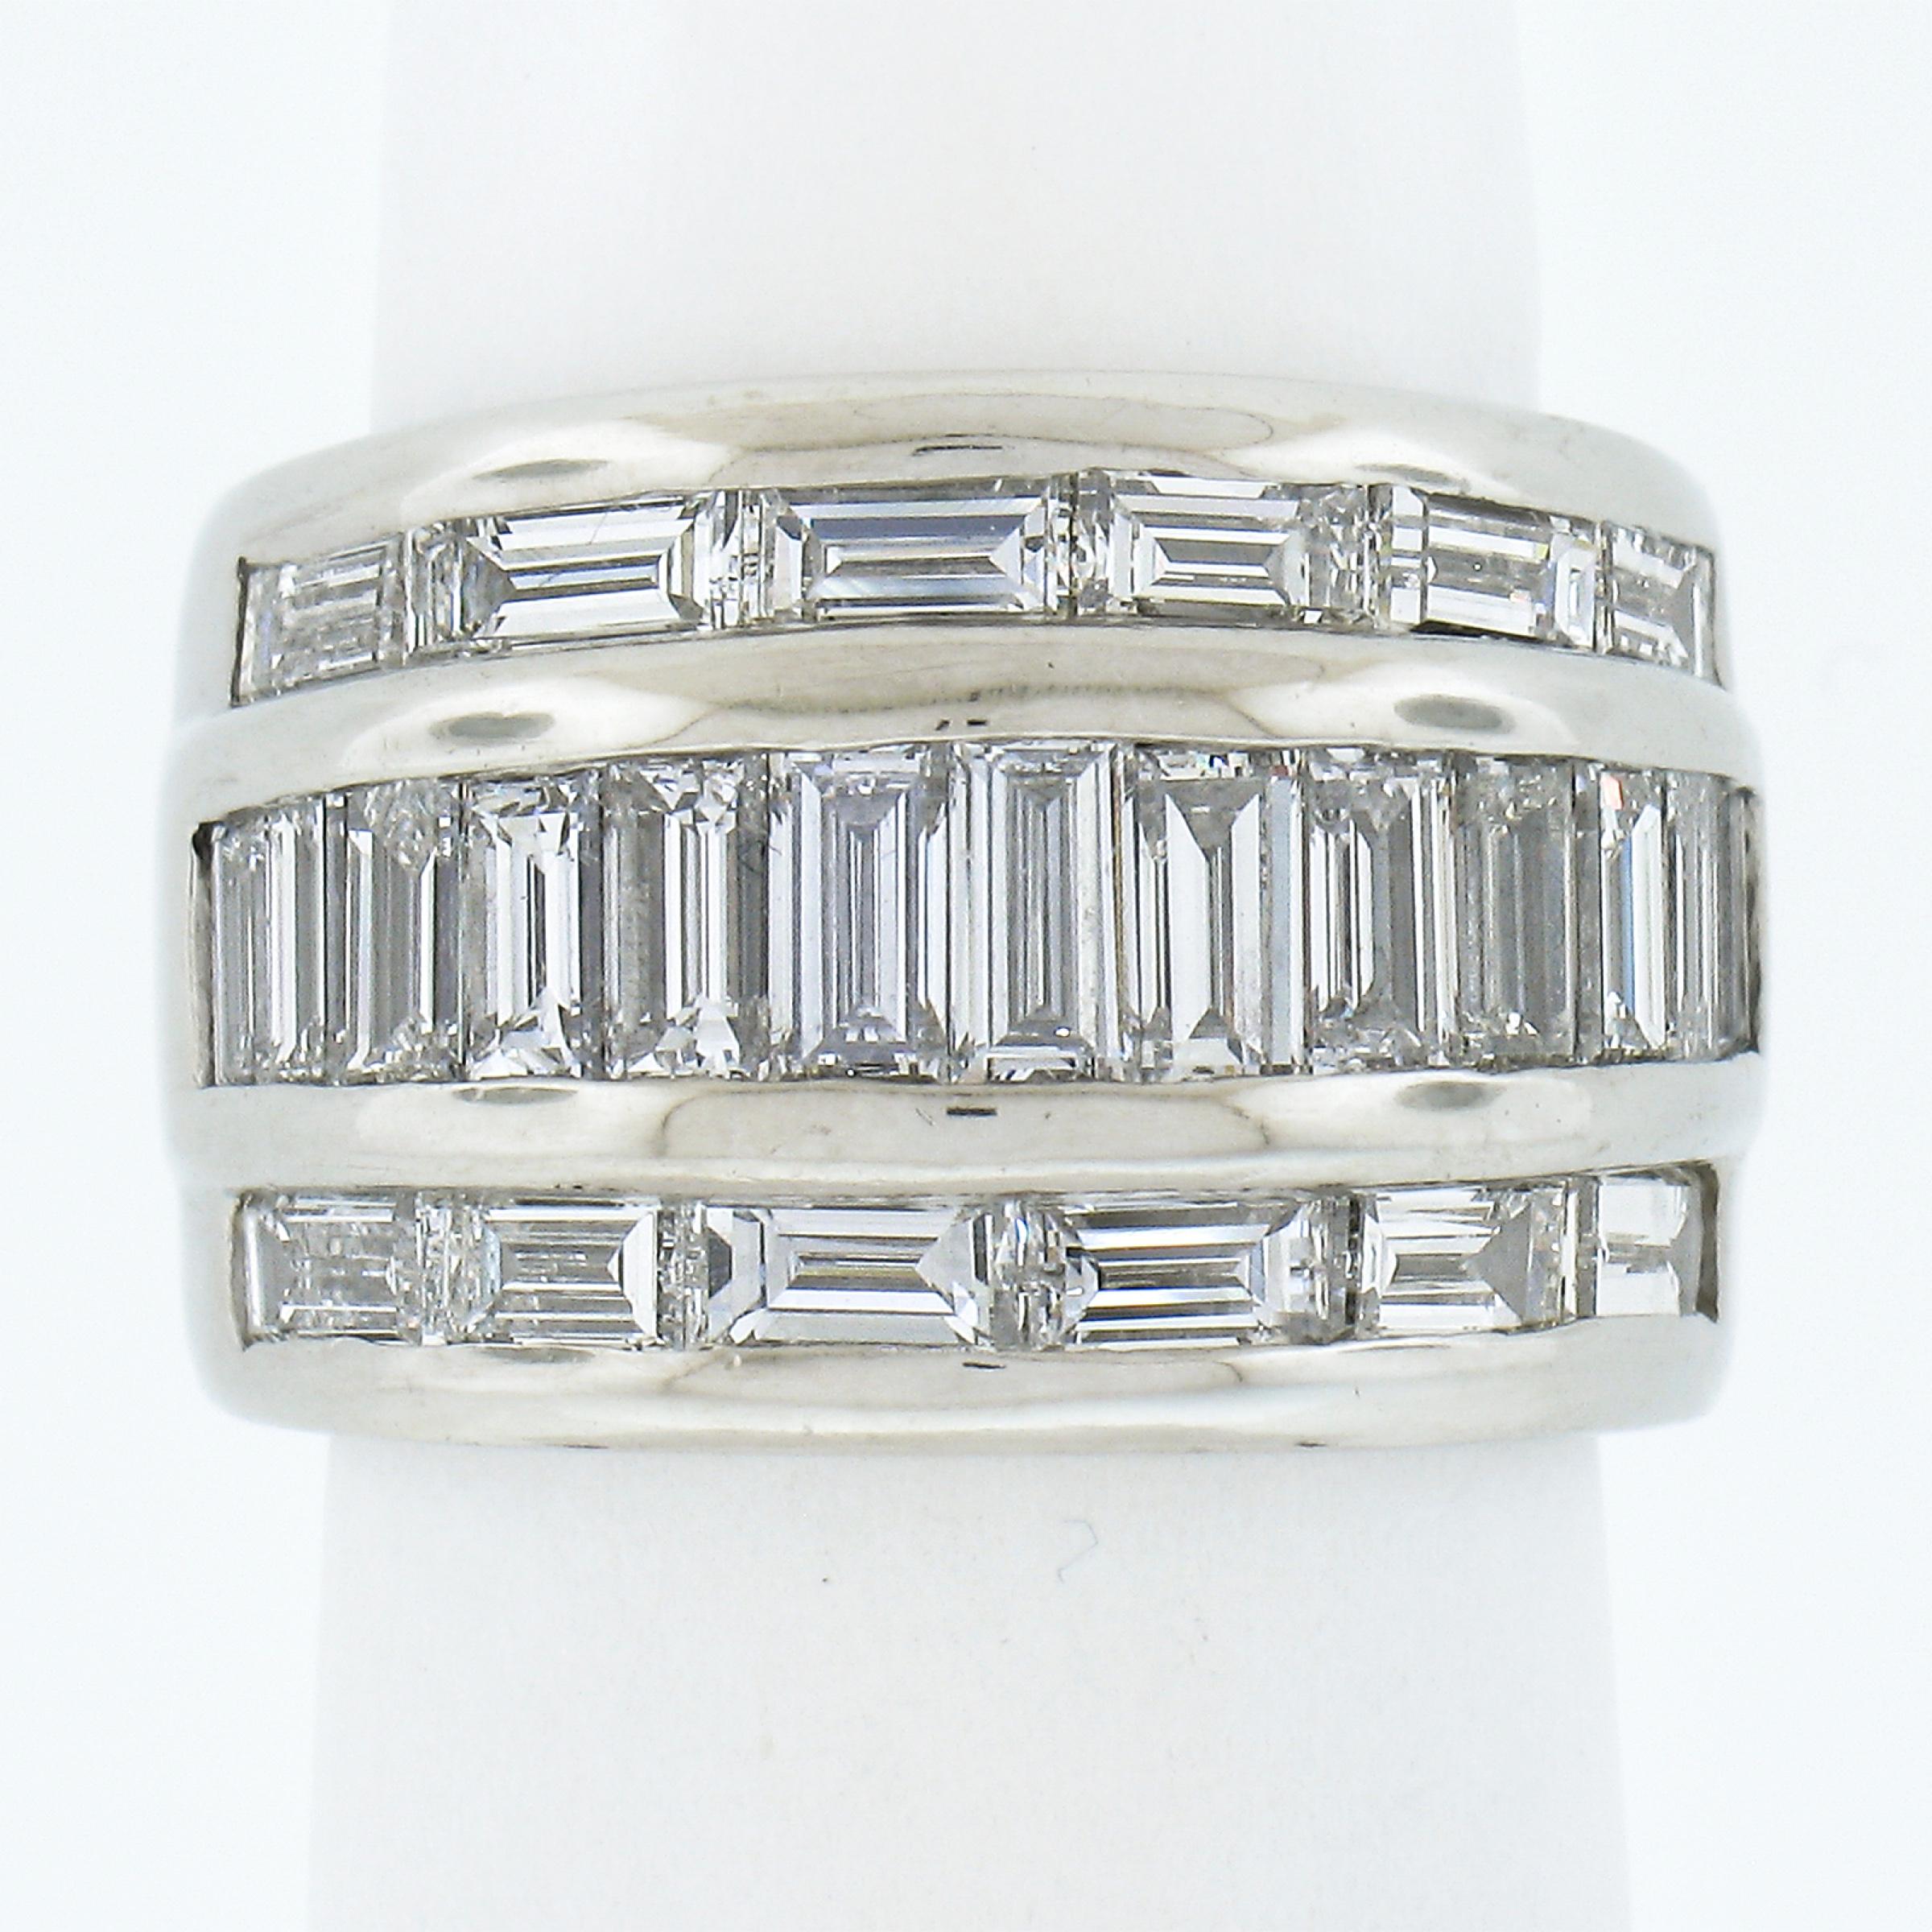 --Stone(s):--
(25) Natural Genuine Diamonds - Straight Baguette Cut - Channel Set - VVS1-VS2 Clarity - G/H Color - 3.5 to 4ctw (approx.)
Total Carat Weight:	3.5-4 (approx.)

Material: Solid Platinum
Weight: 24.38 Grams
Ring Size: 5.0 (We CANNOT